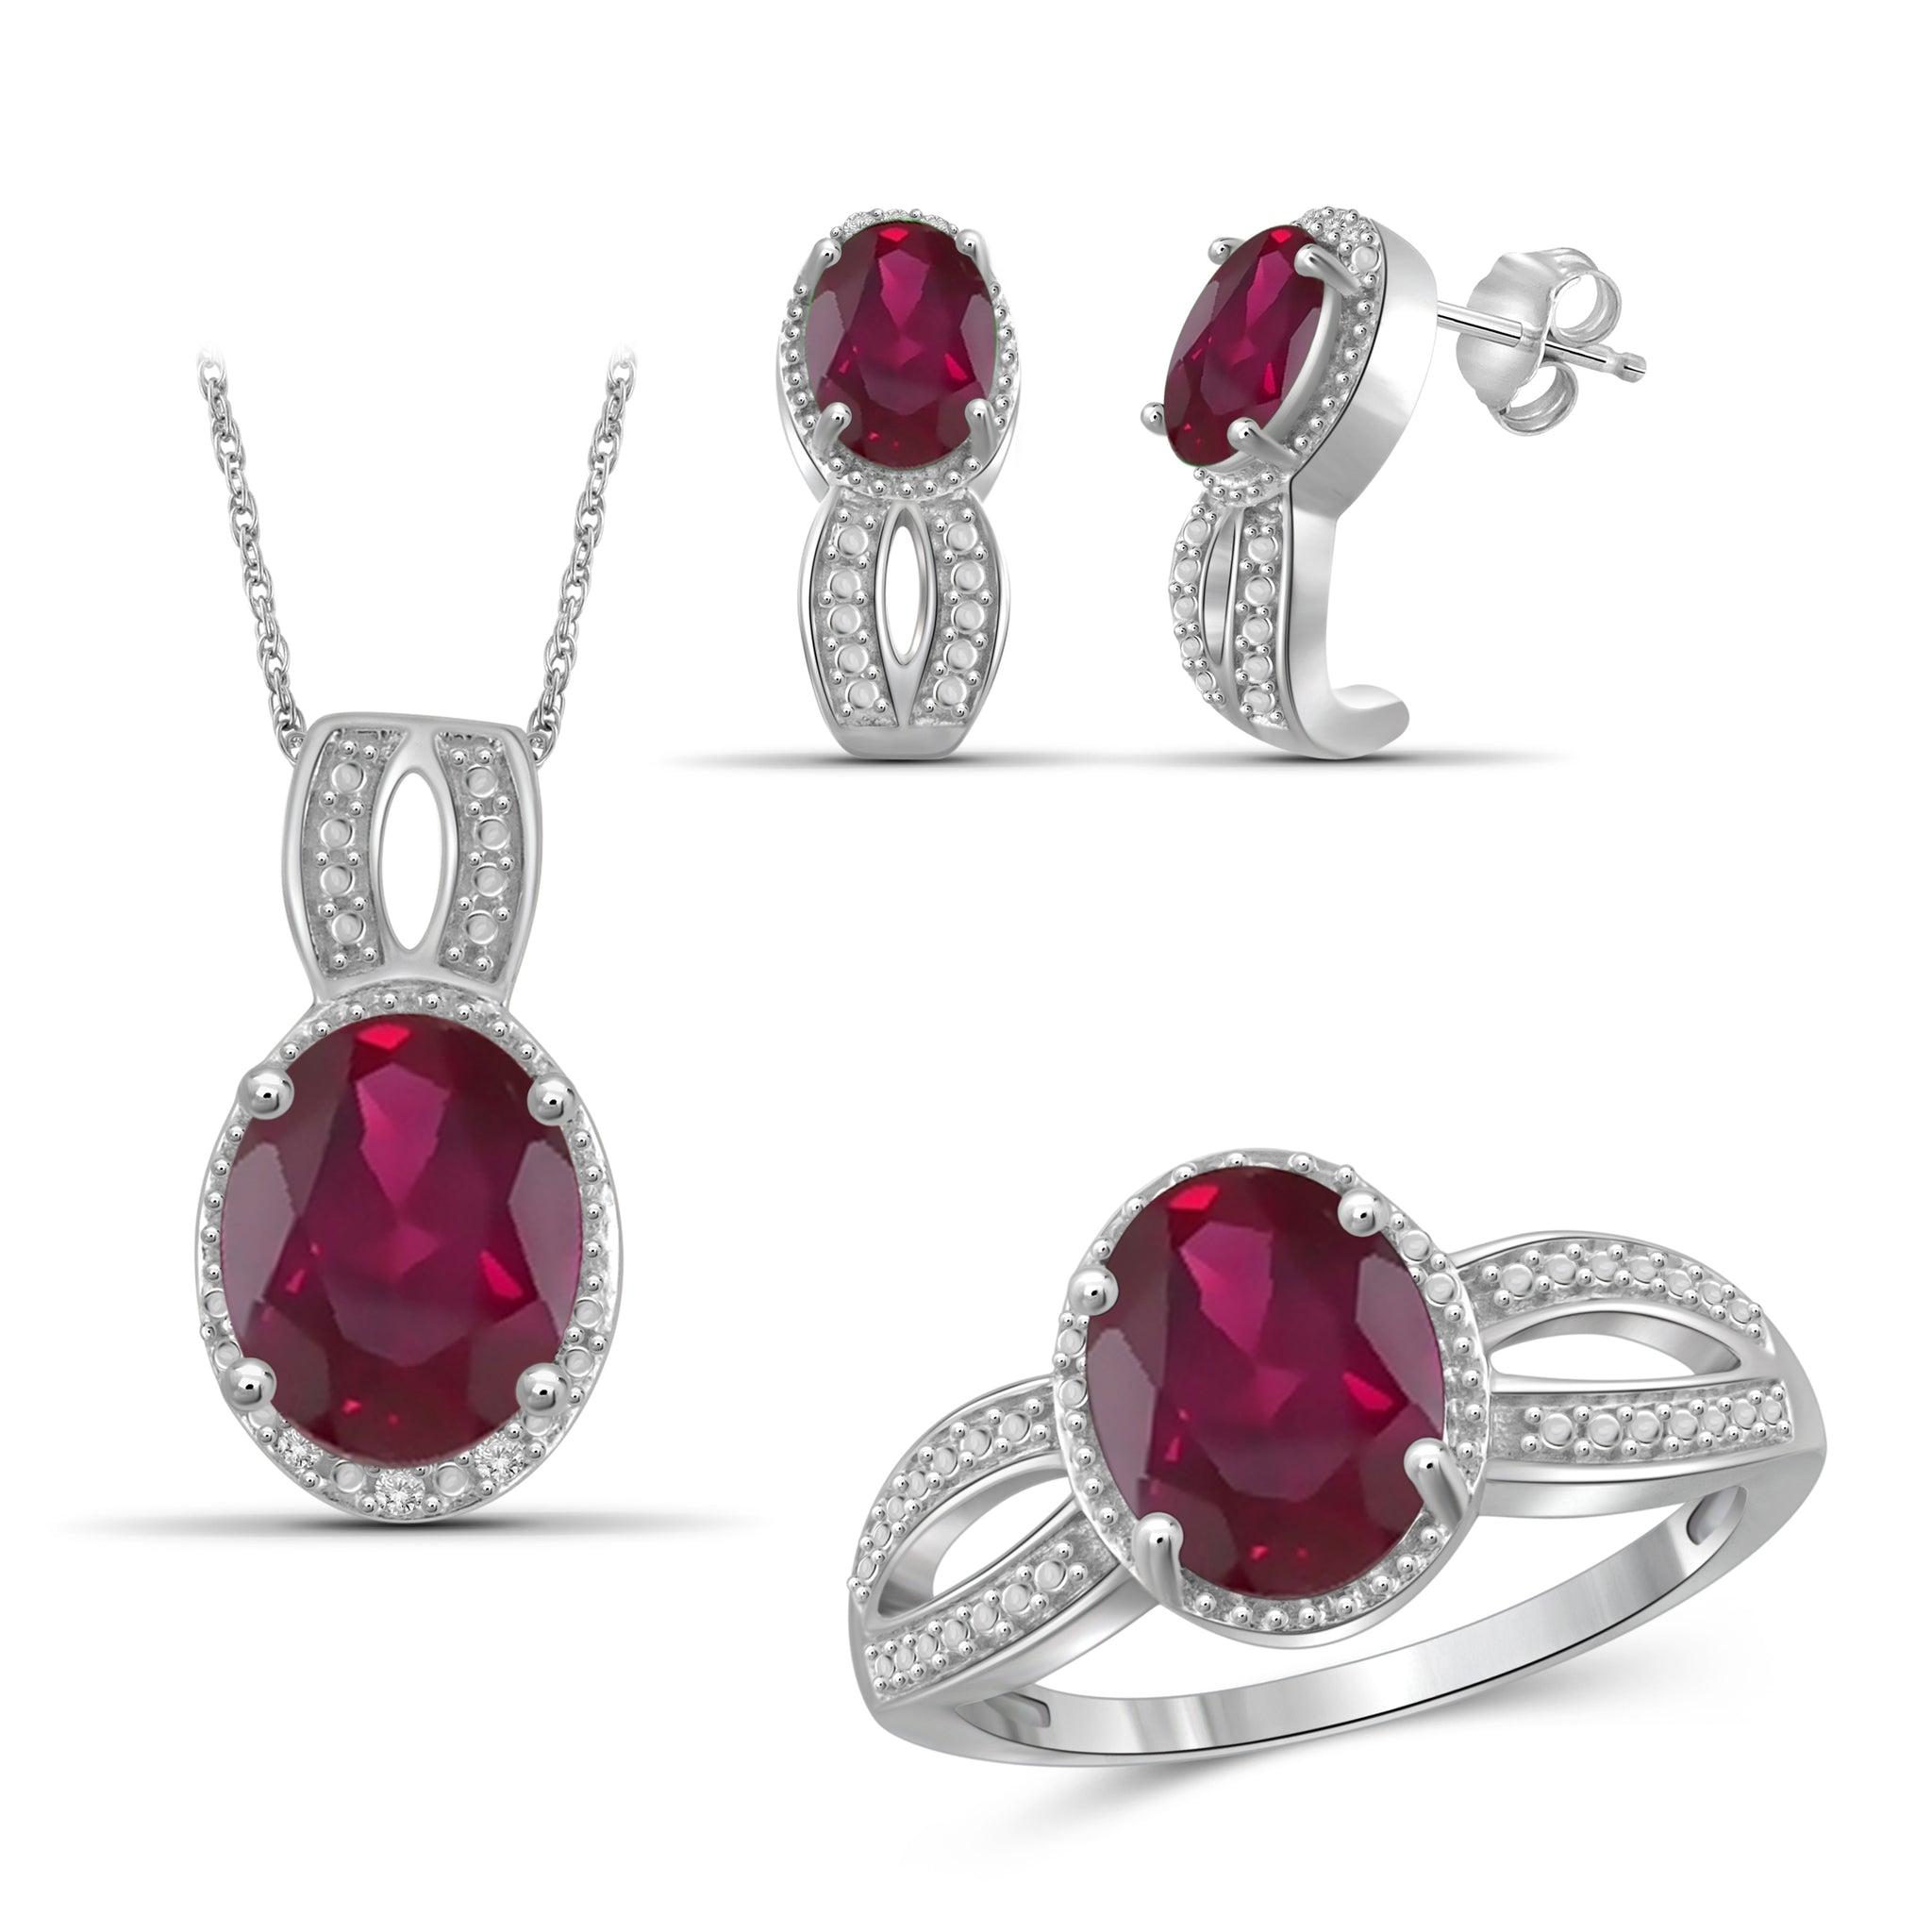 JewelonFire 9.90 Carat T.G.W. Ruby And 1/20 Carat T.W. White Diamond Sterling Silver 3 Piece Jewelry Set - Assorted Colors